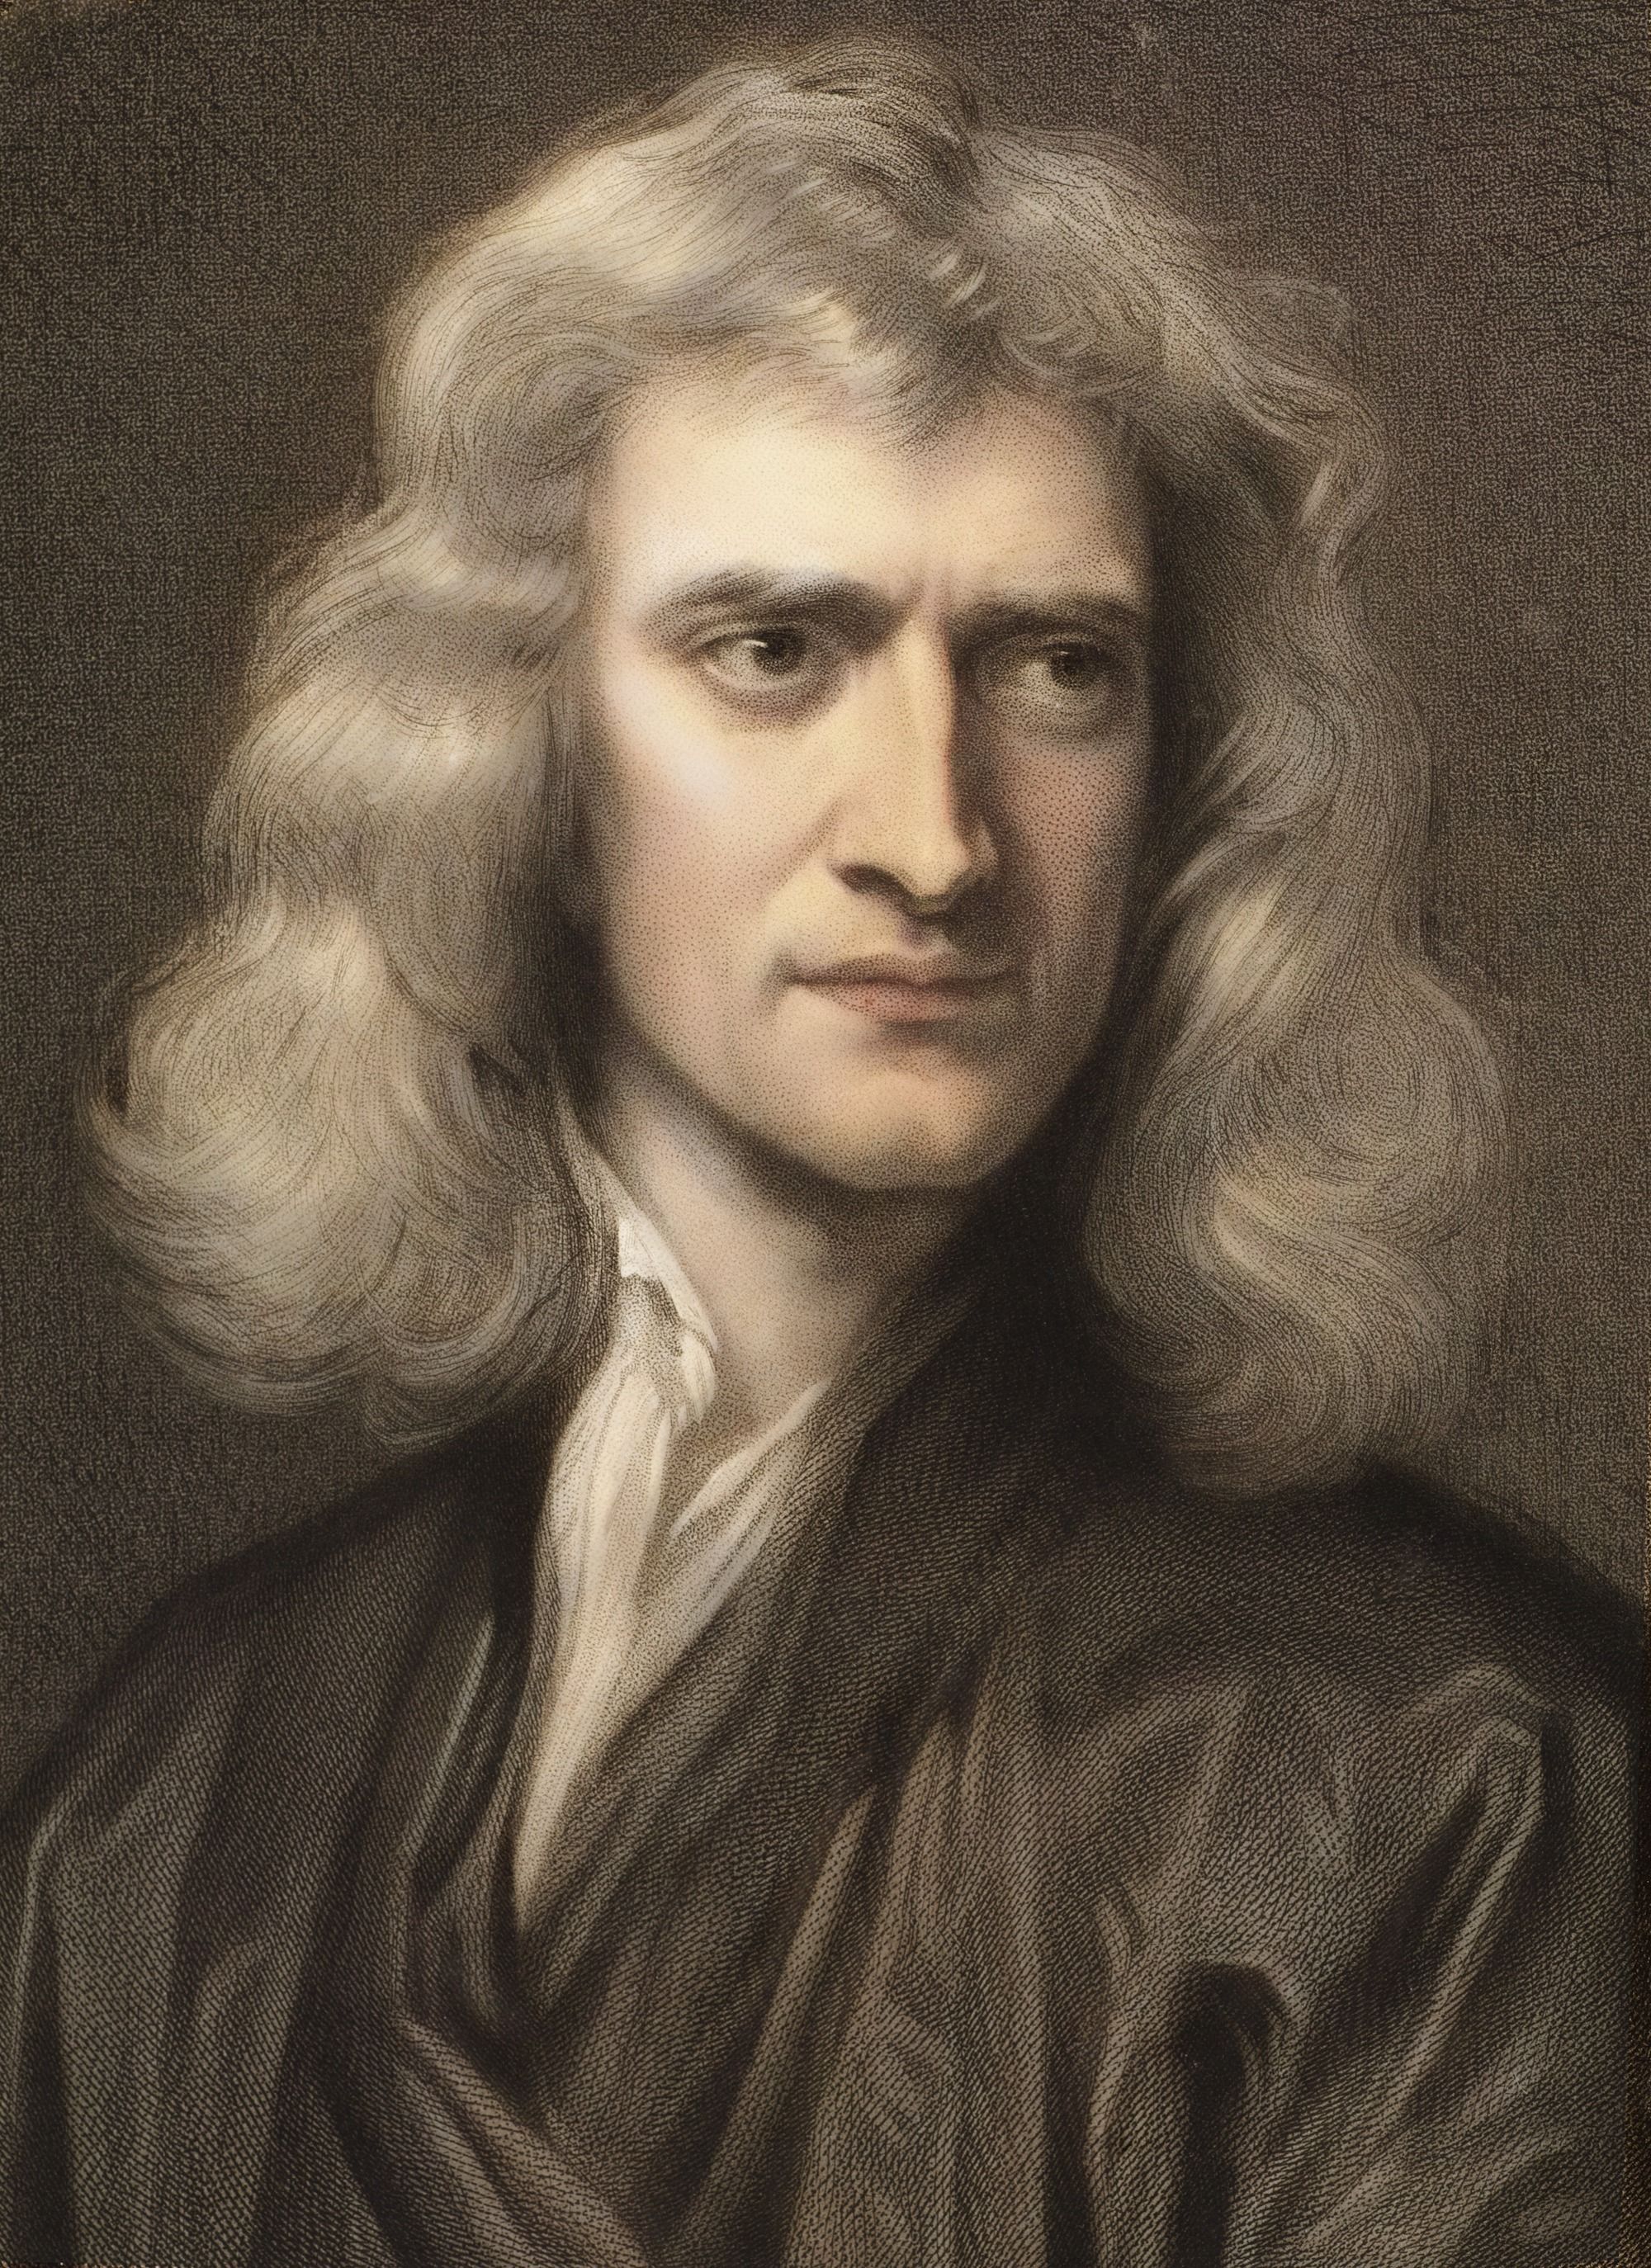 Sir Isaac Newton Worksheet. Printable Worksheets and Activities for Teachers, Parents, Tutors and Homeschool Families